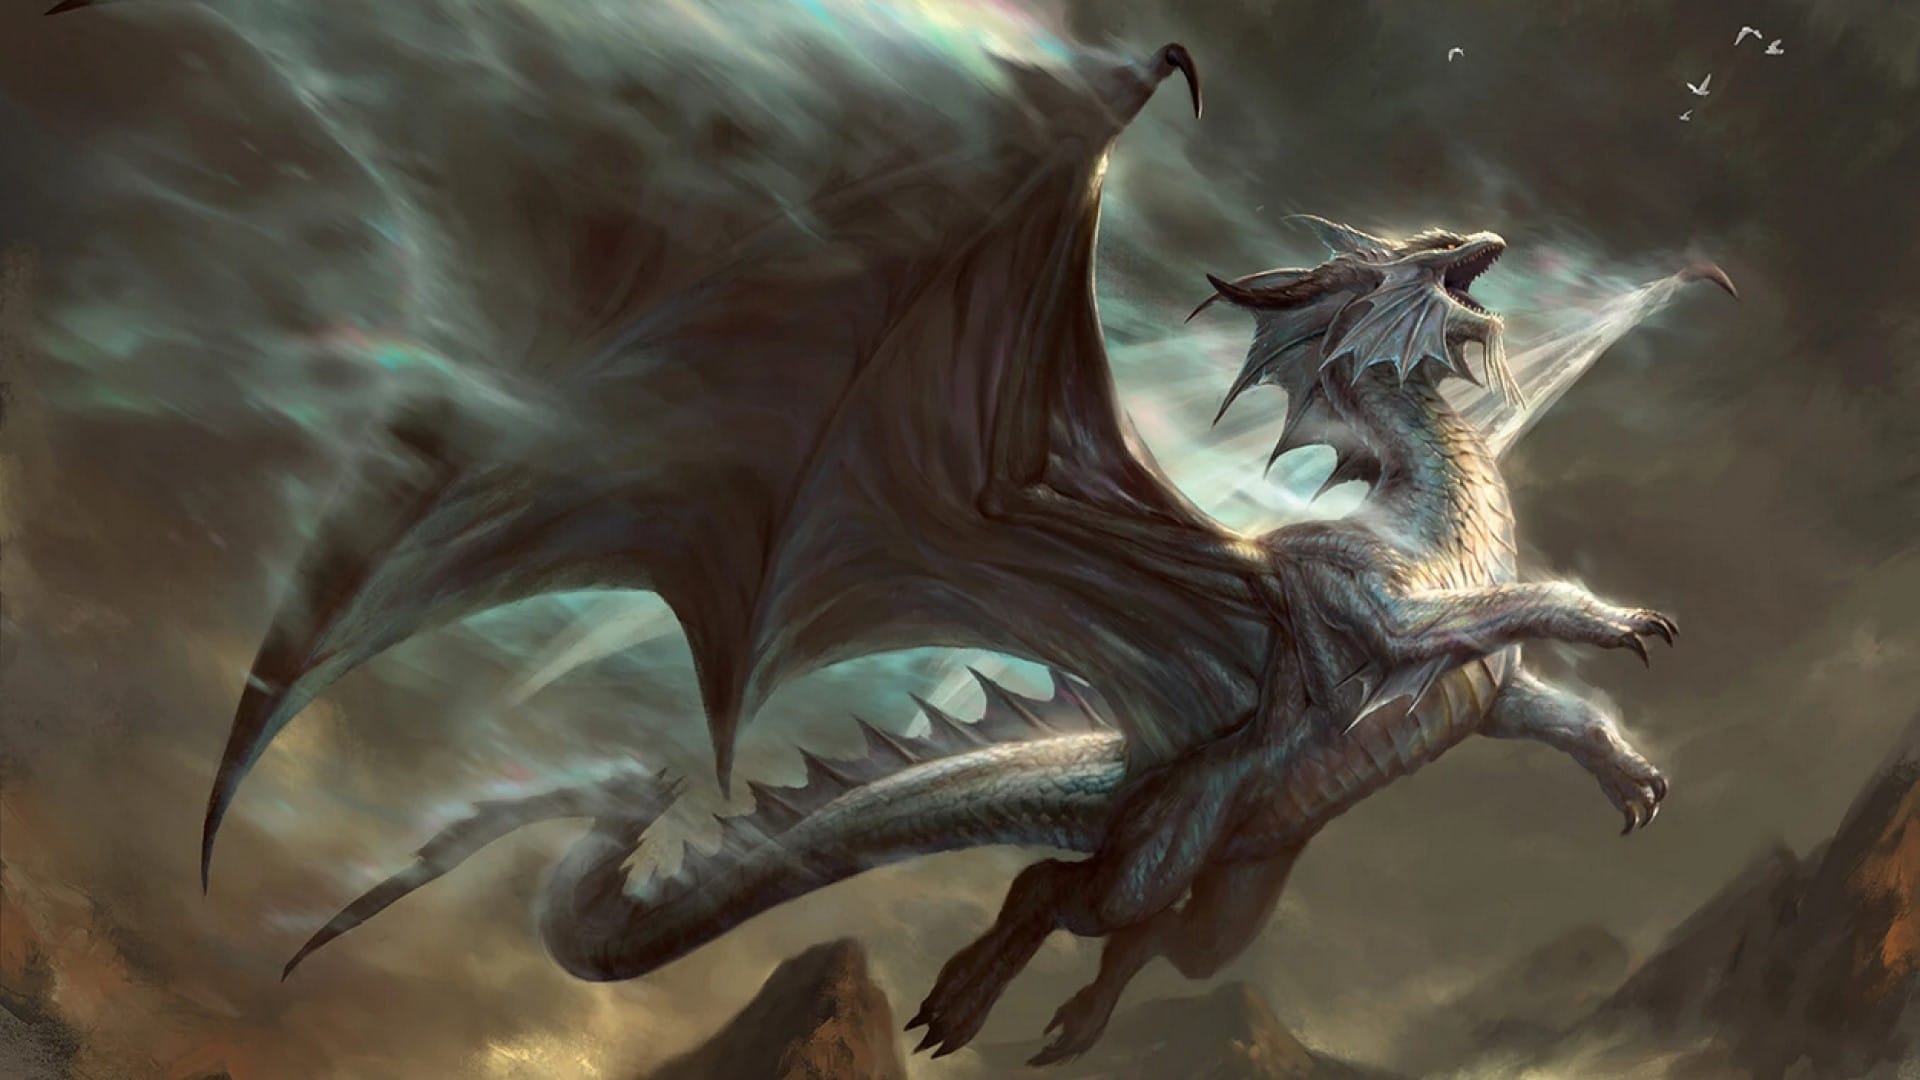 Artwork of the dragon Bahamut from Dungeons & Dragons illustrated by Penguin Random House LLC.